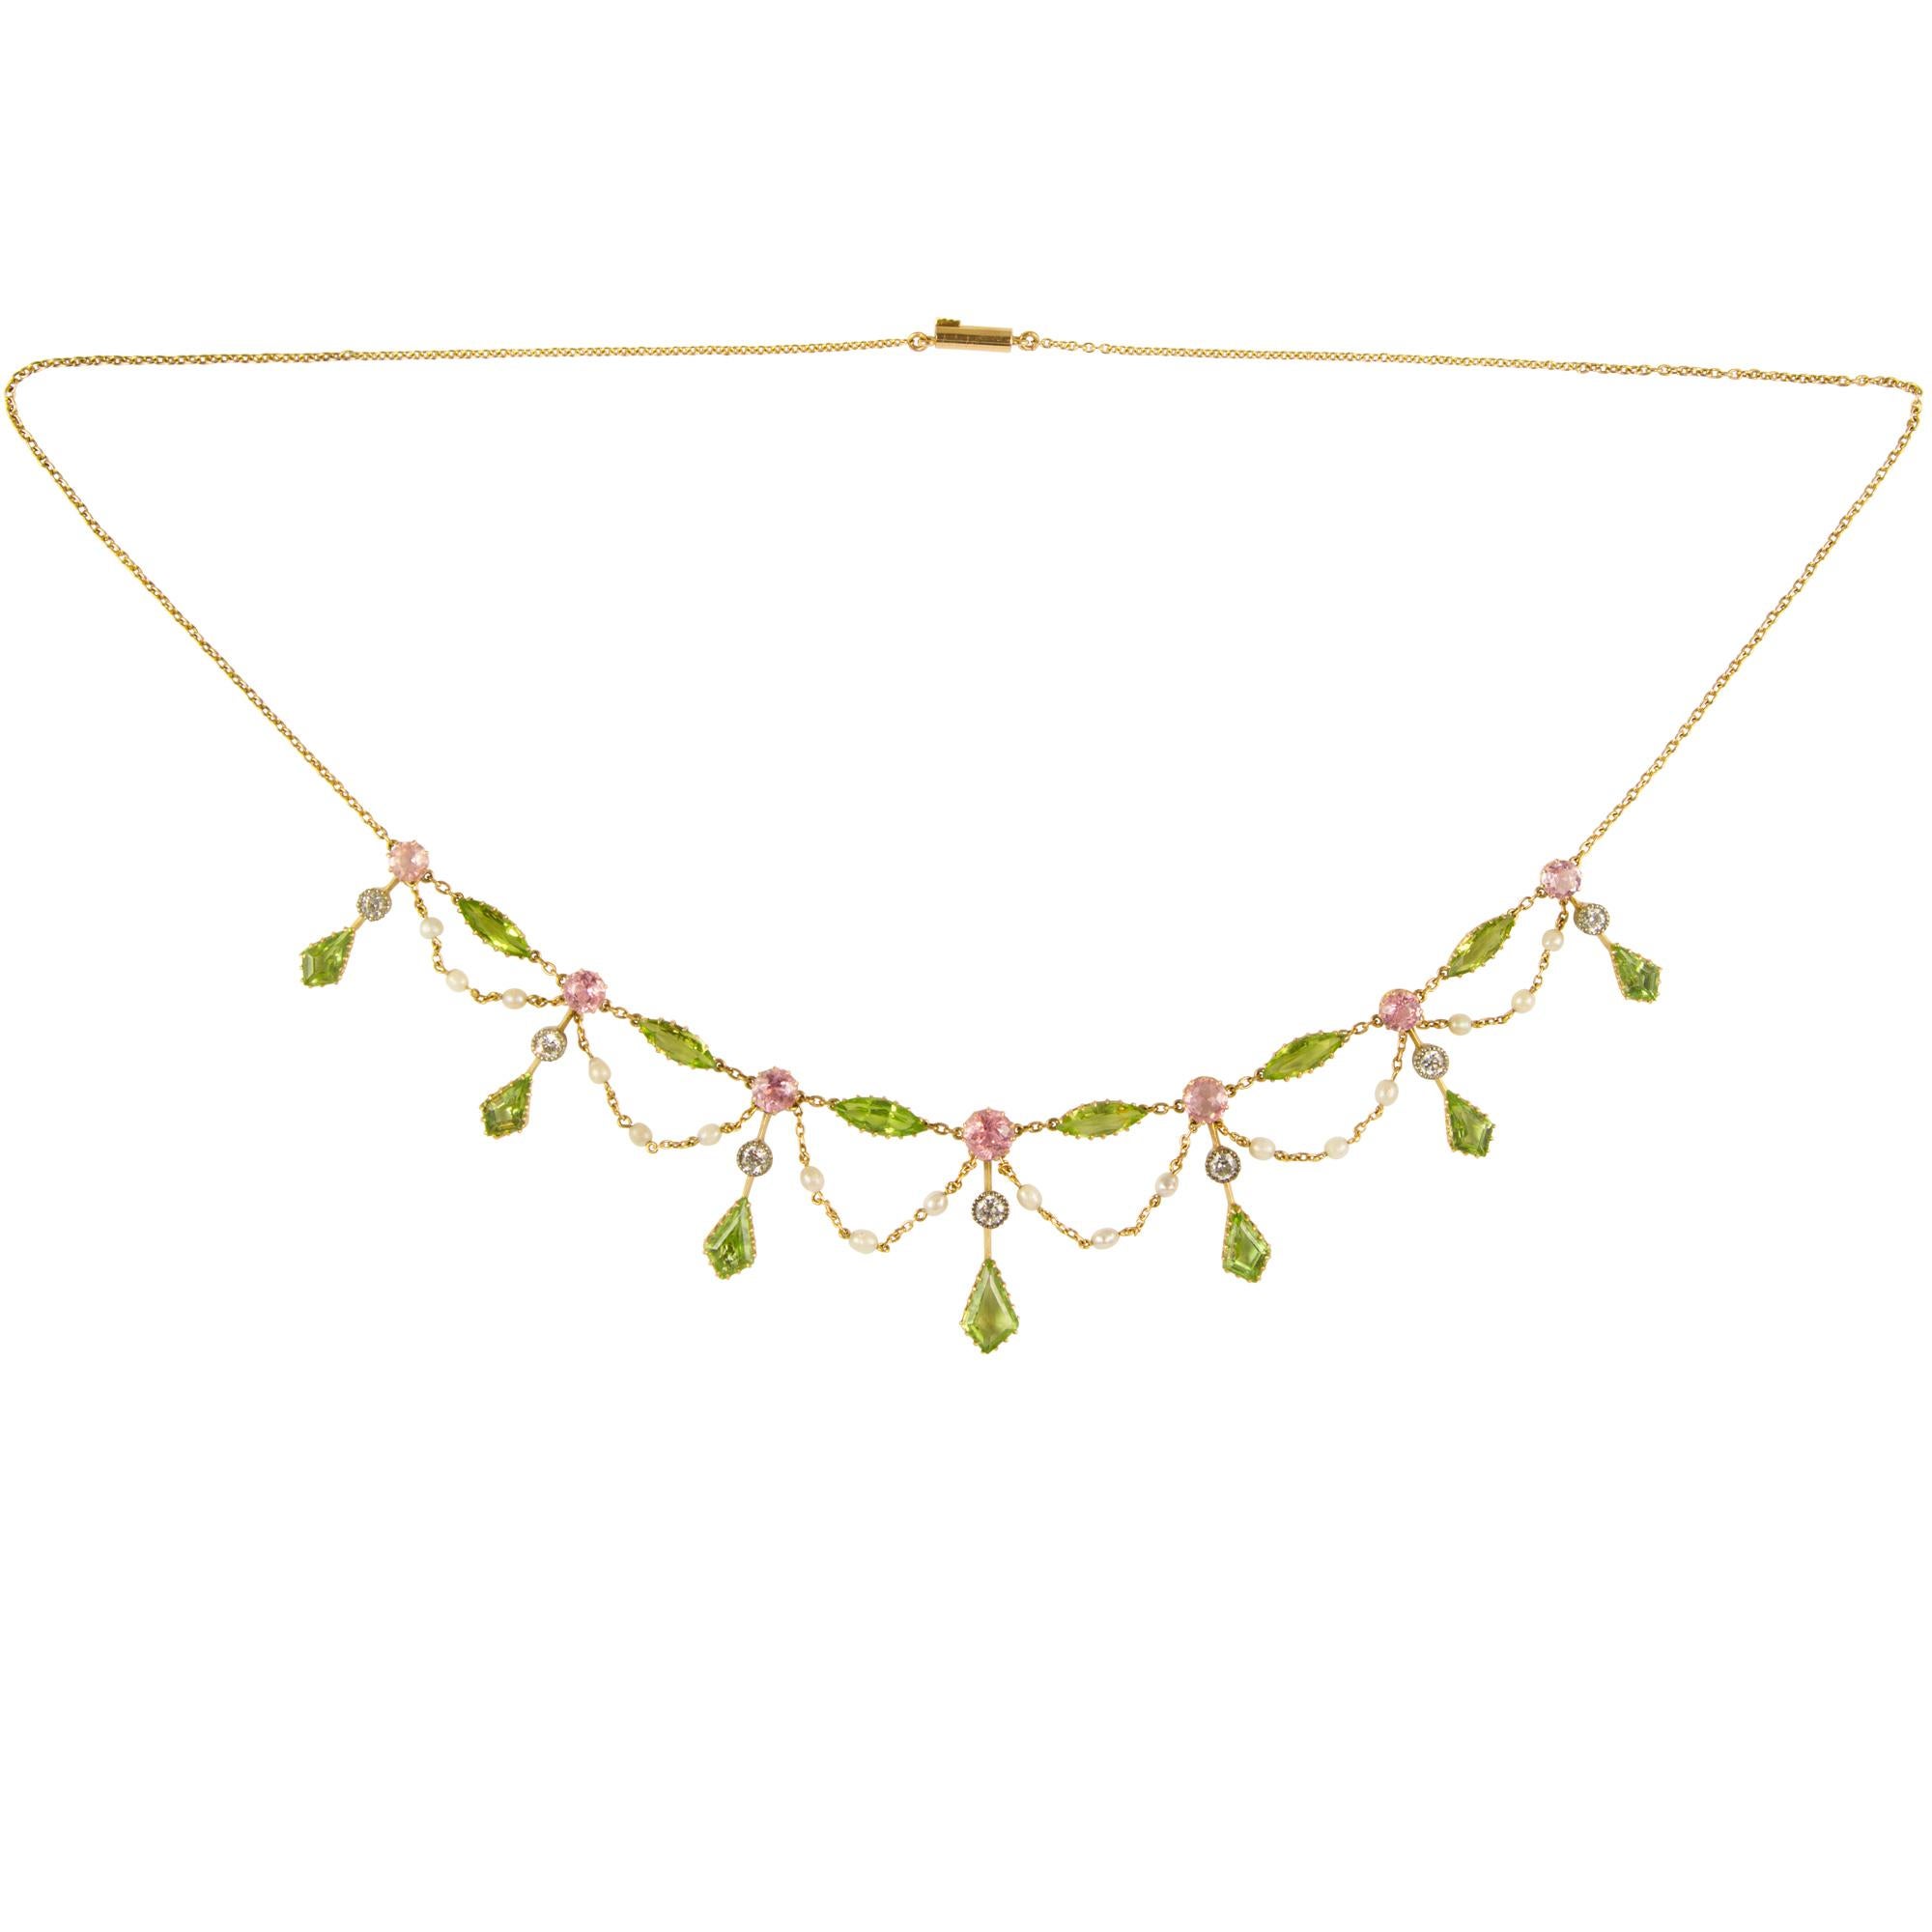 An Edwardian gem-set necklace, the necklace comprising of seven graduating pendant drops of round pink tourmalines, kite shape peridots and old brilliant-cut diamonds, the diamonds weighing a total of 0.72 carats, with six navette shape peridots and